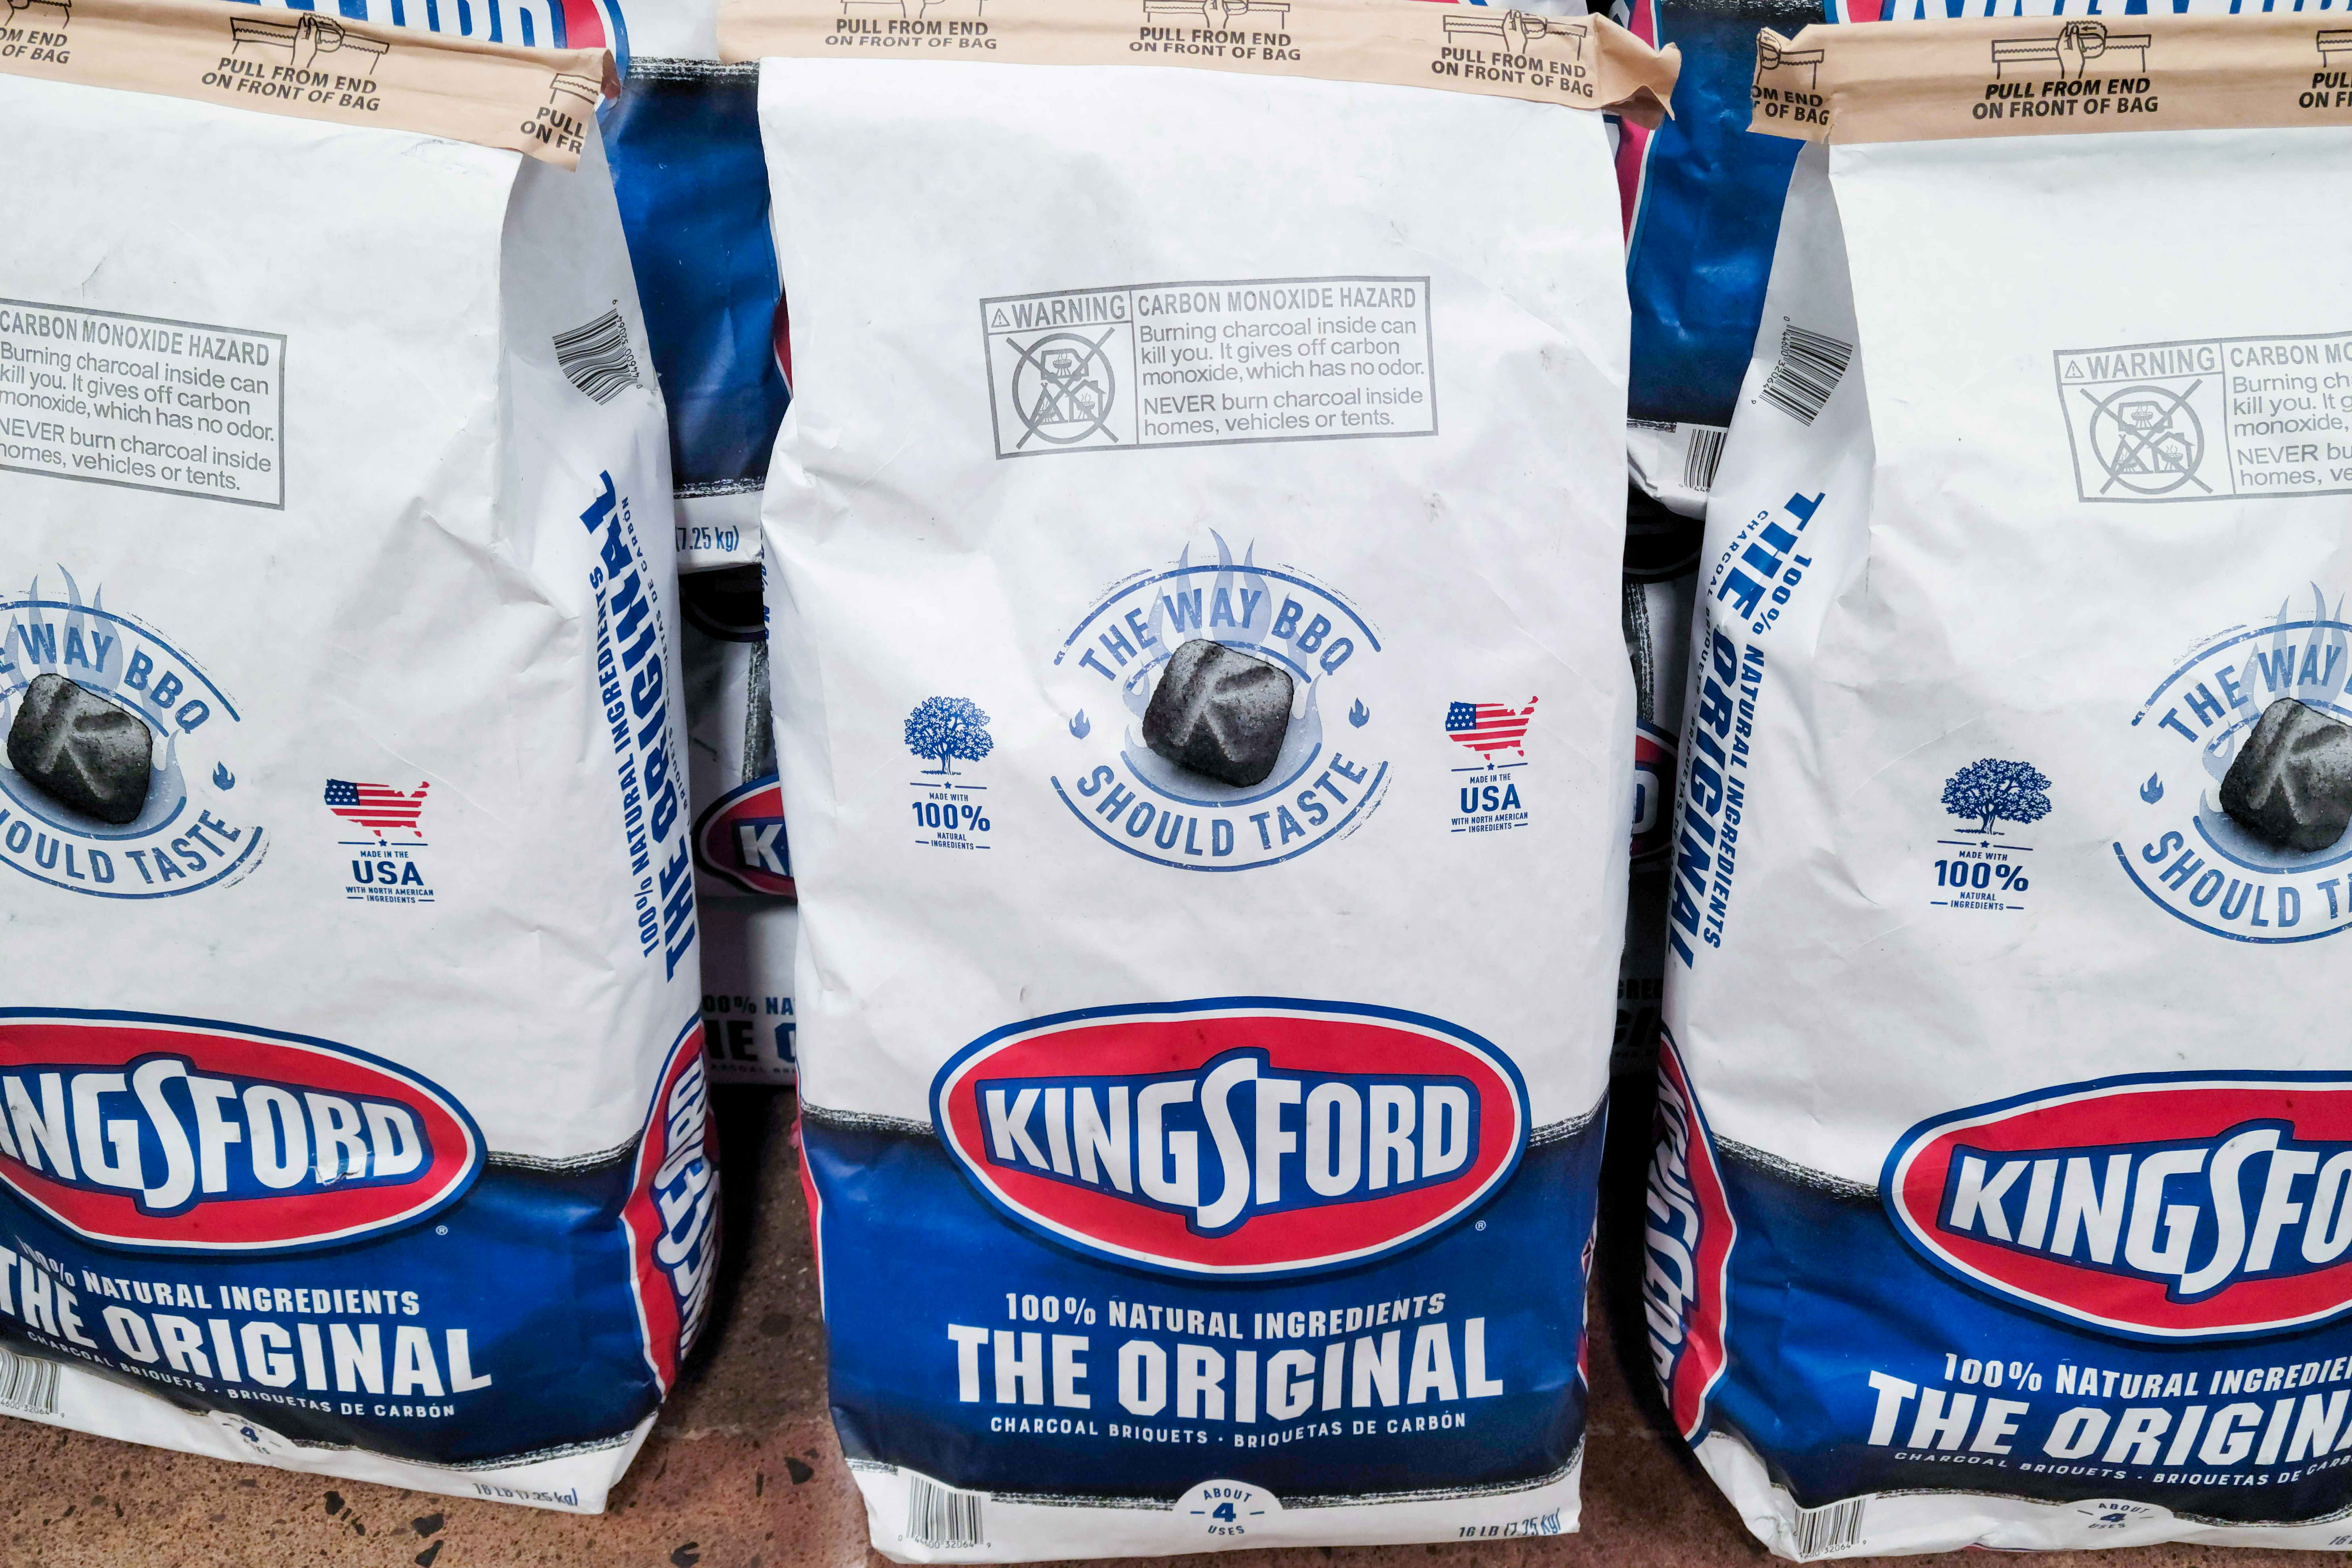 Kingsford Charcoal, Only $0.49 at Kroger